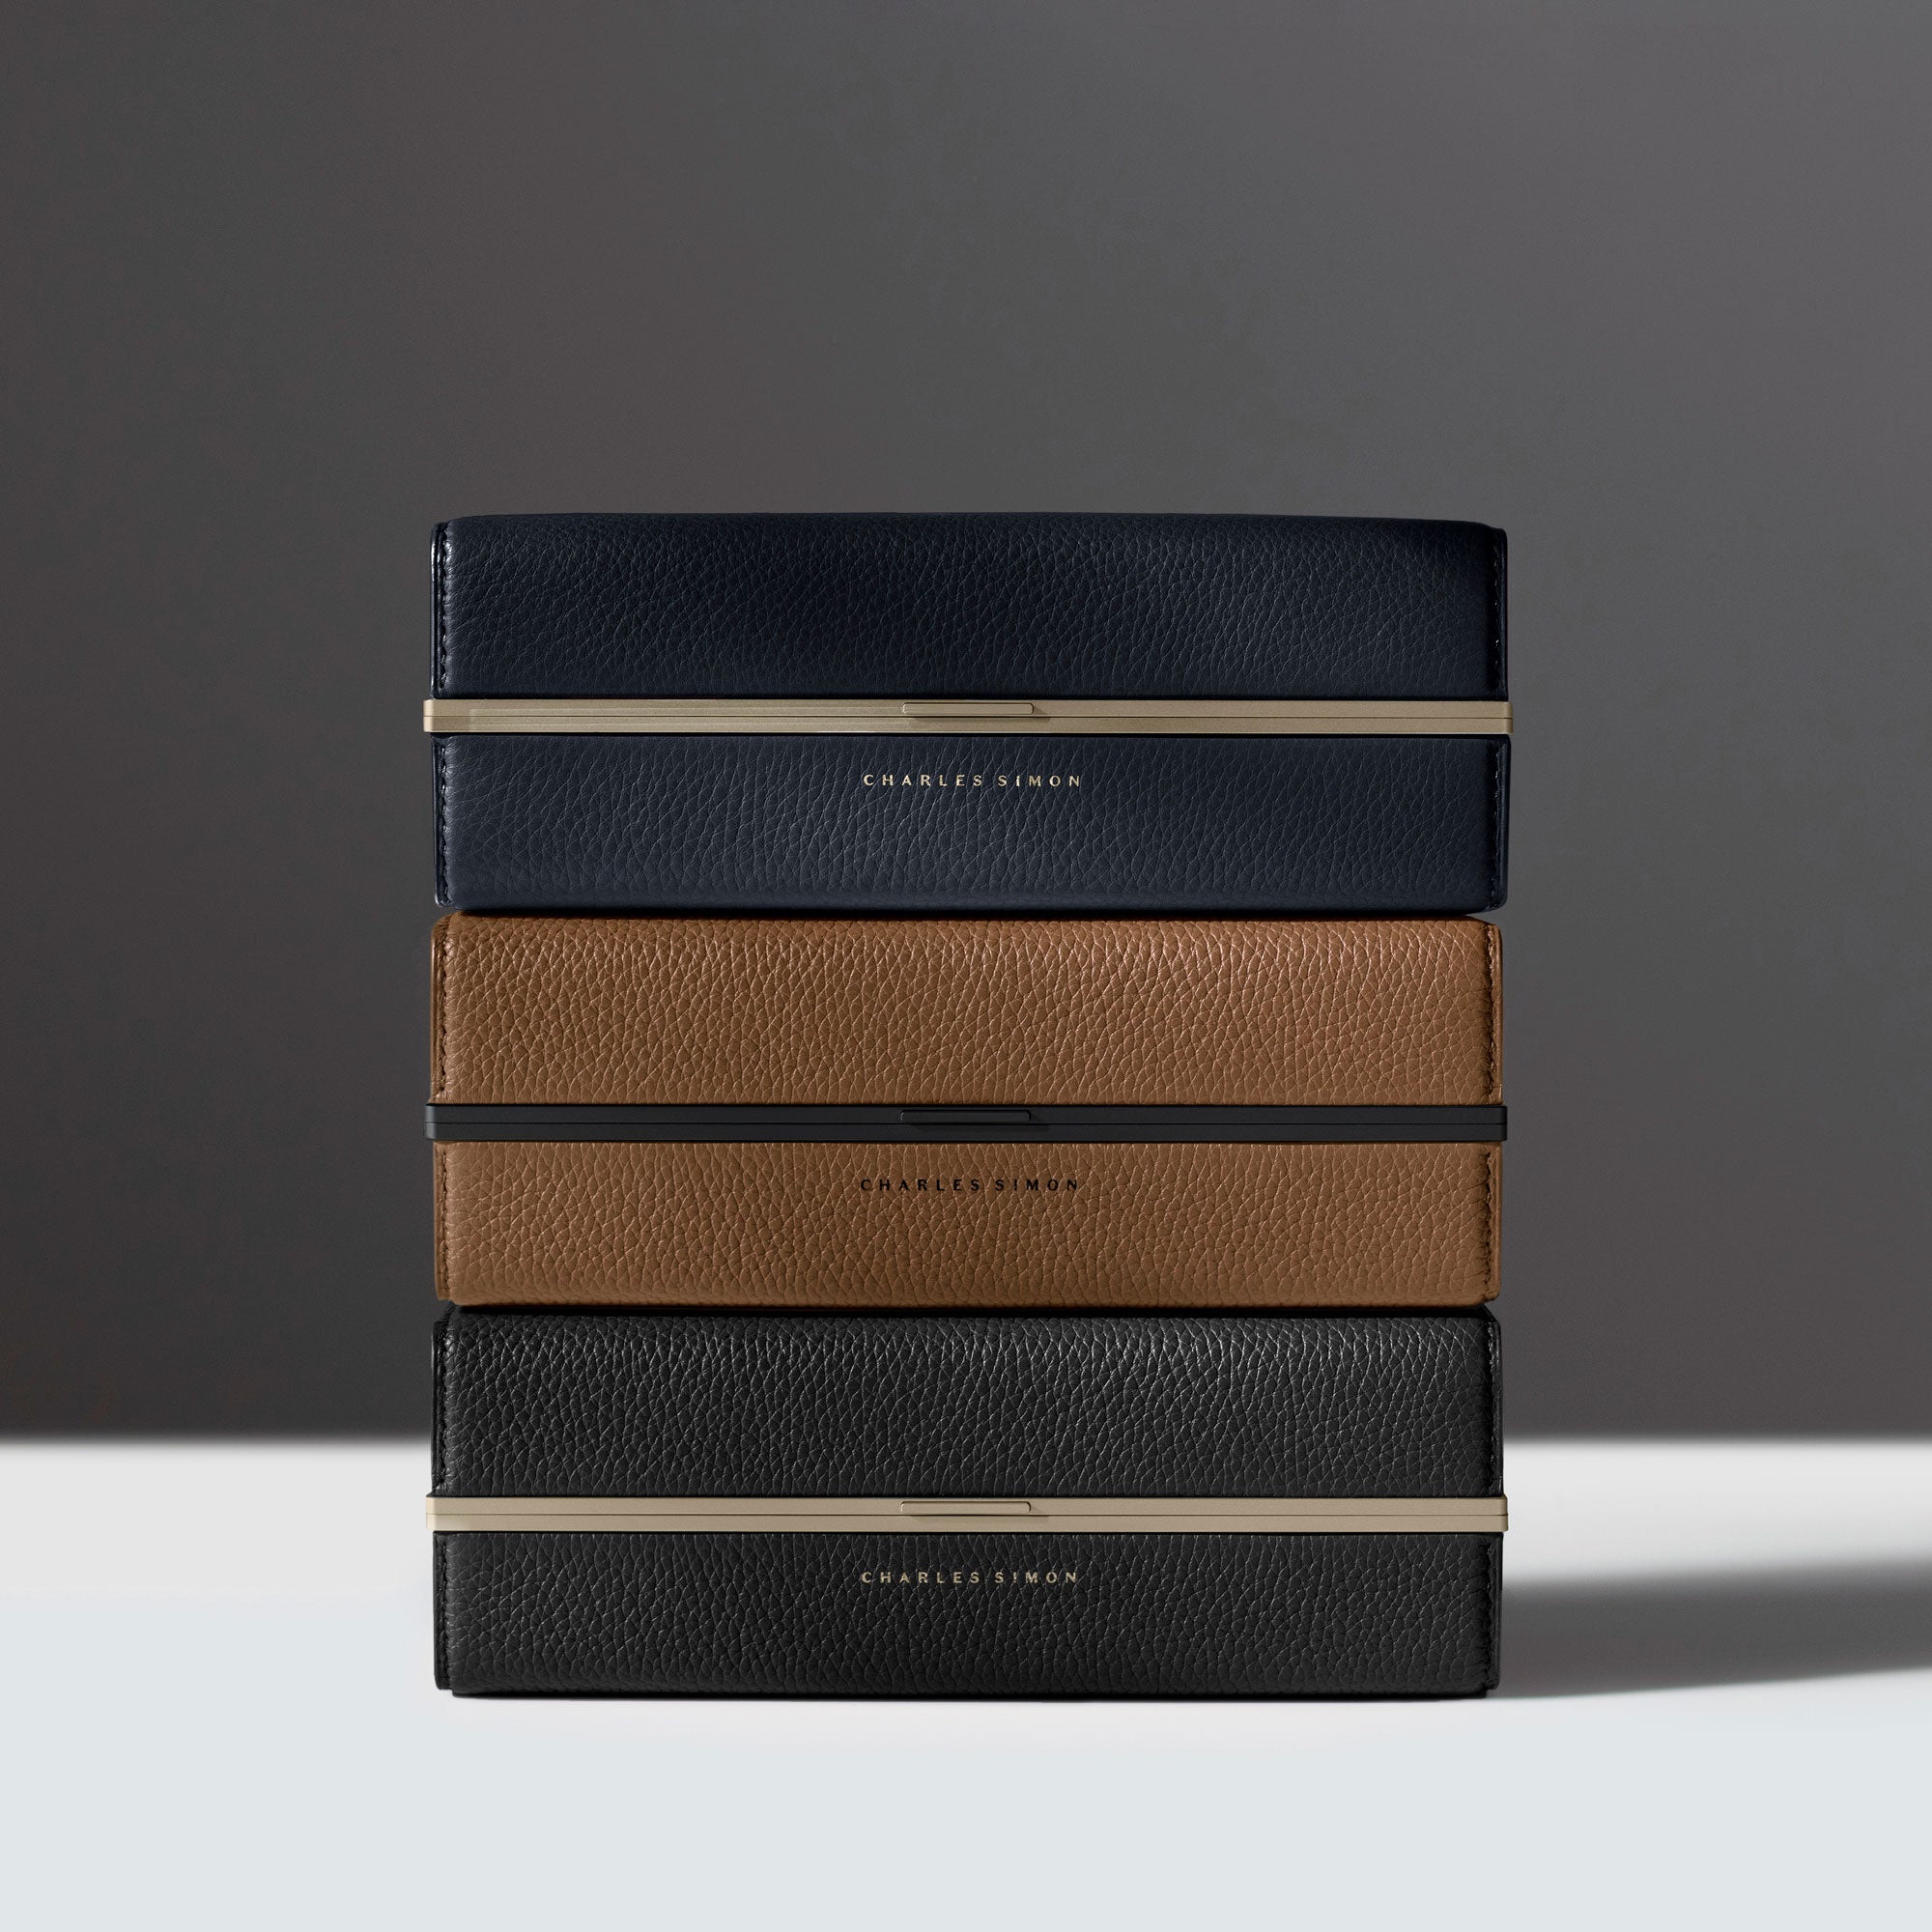 Lifestyle photo of three stacked minimalist toiletry cases by Charles Simon.